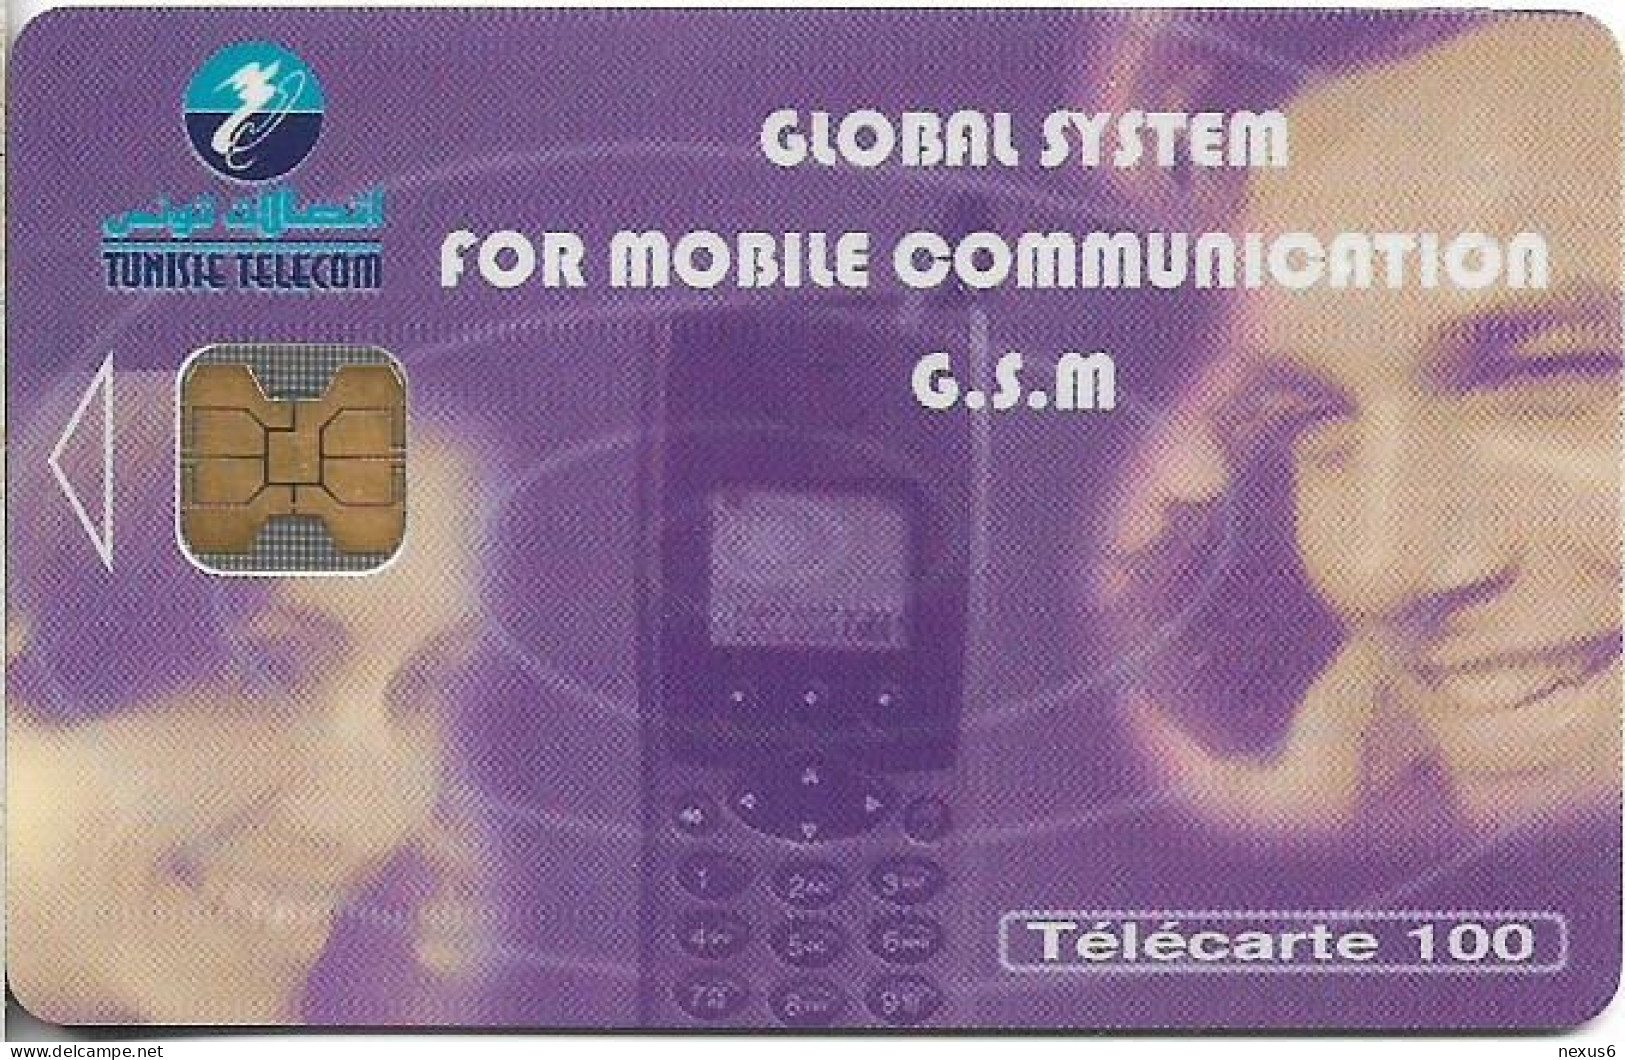 Tunisia - Tunisie Telecom - Global System For Mobile Comm., 100Units, Chip Oberthur, 01.2000, 30.000ex, Used - Tunisia